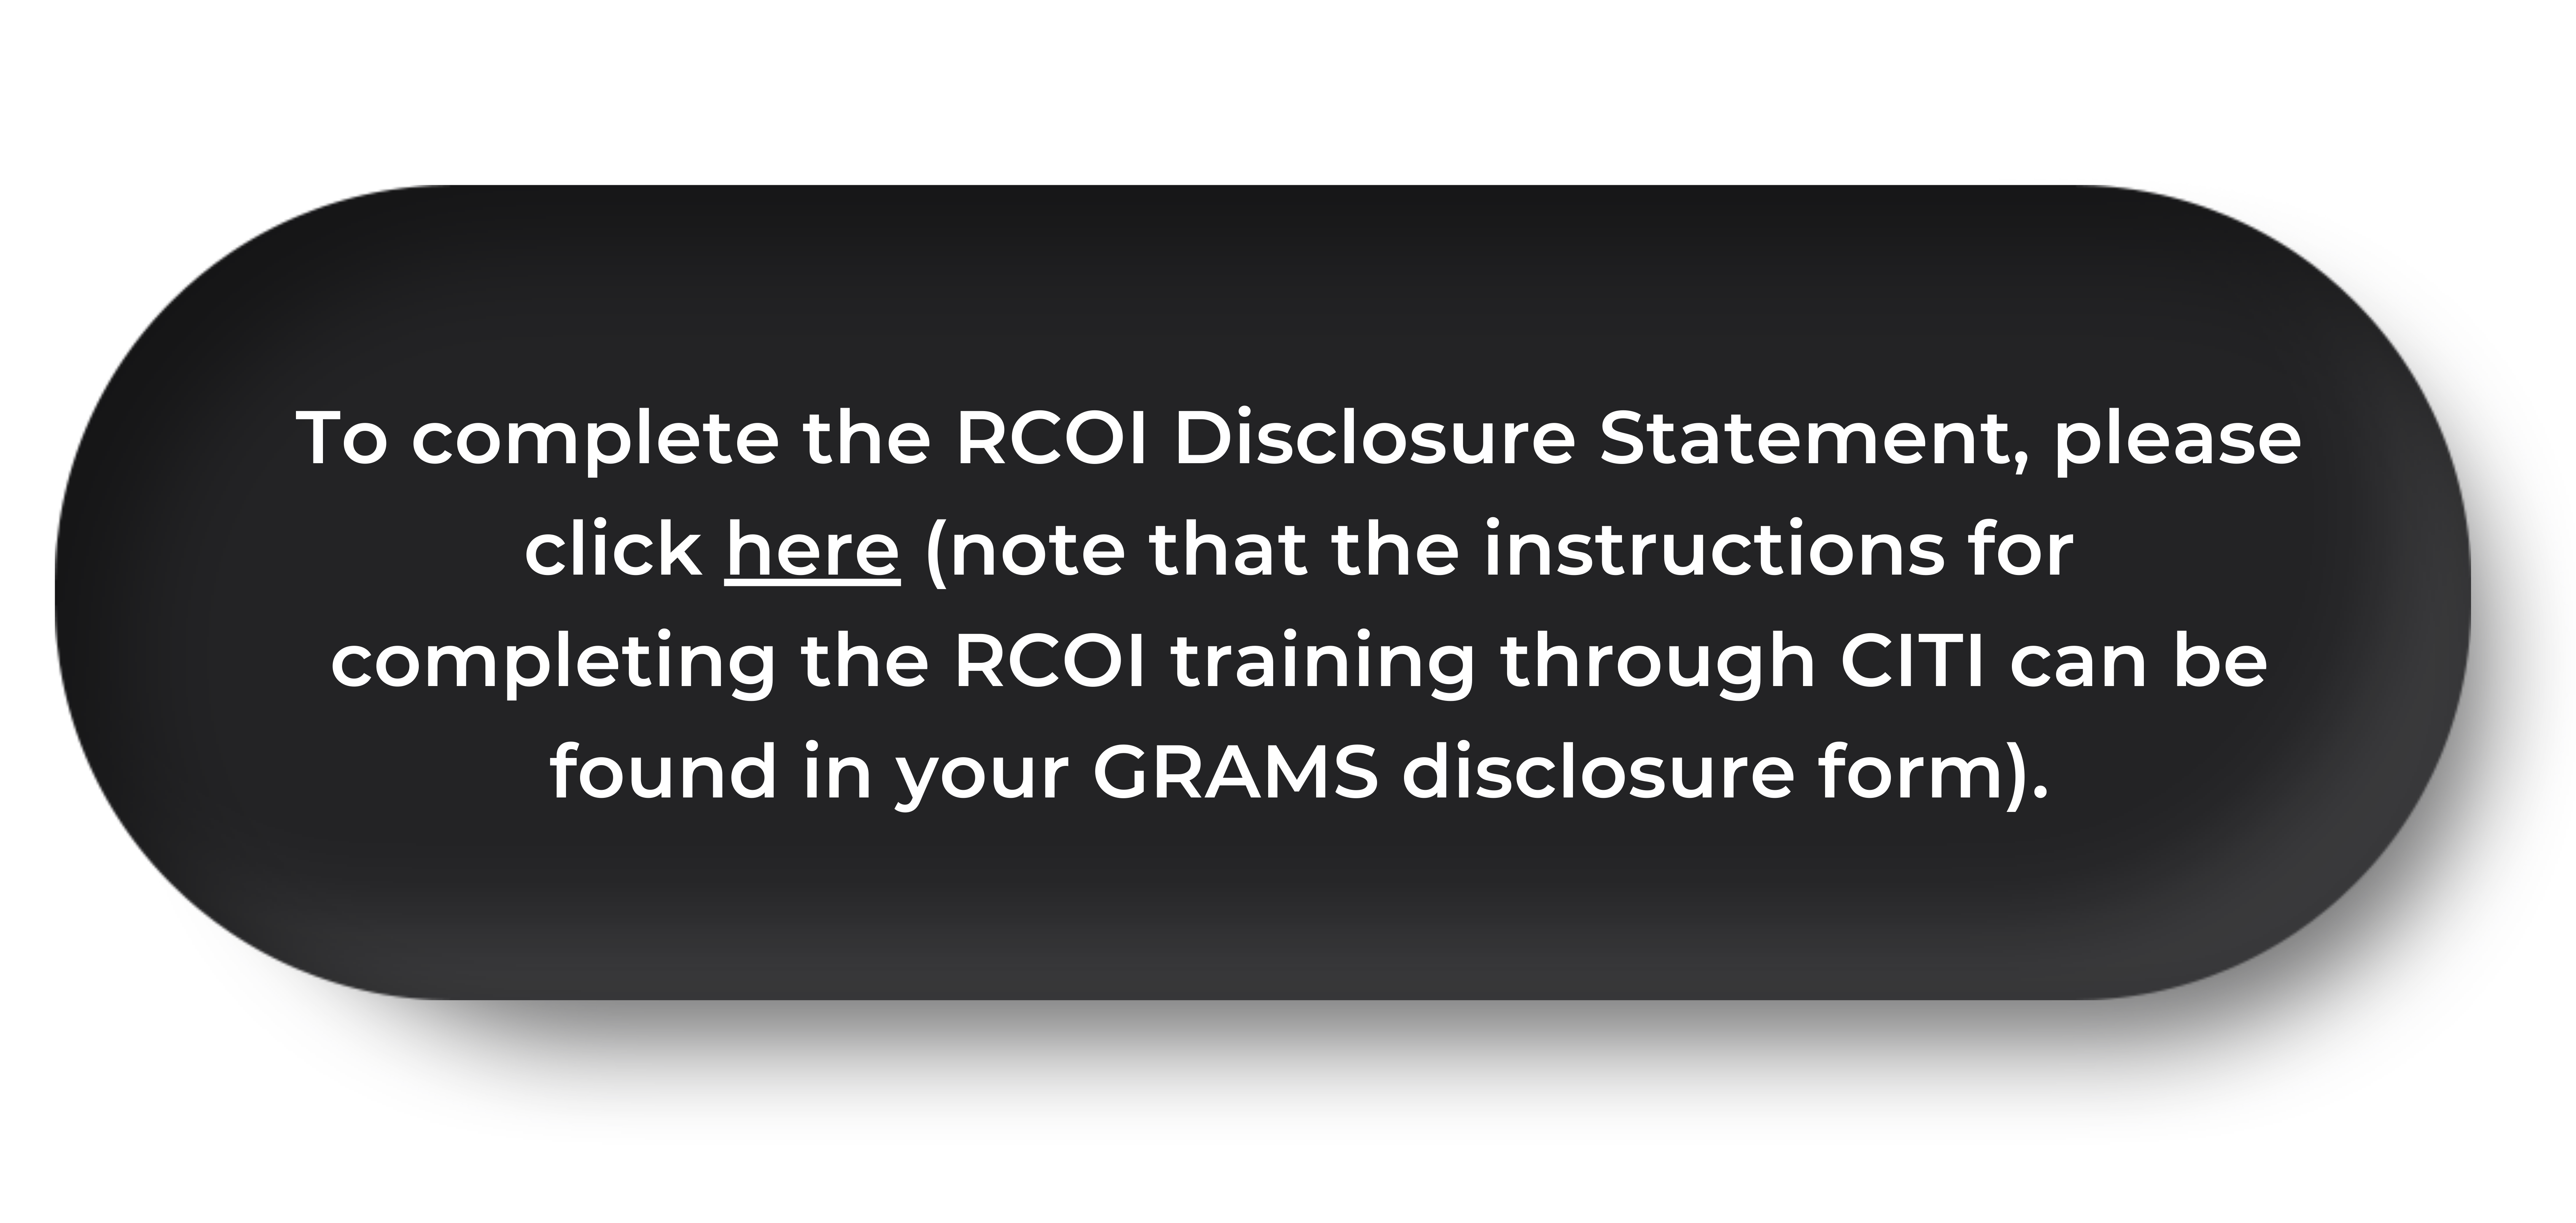 Black, oval button with text that states “To complete the RCOI Disclosure Statement, please click here (note that the instructions for completing the RCOI training through CITI can be found in your GRAMS disclosure form).”